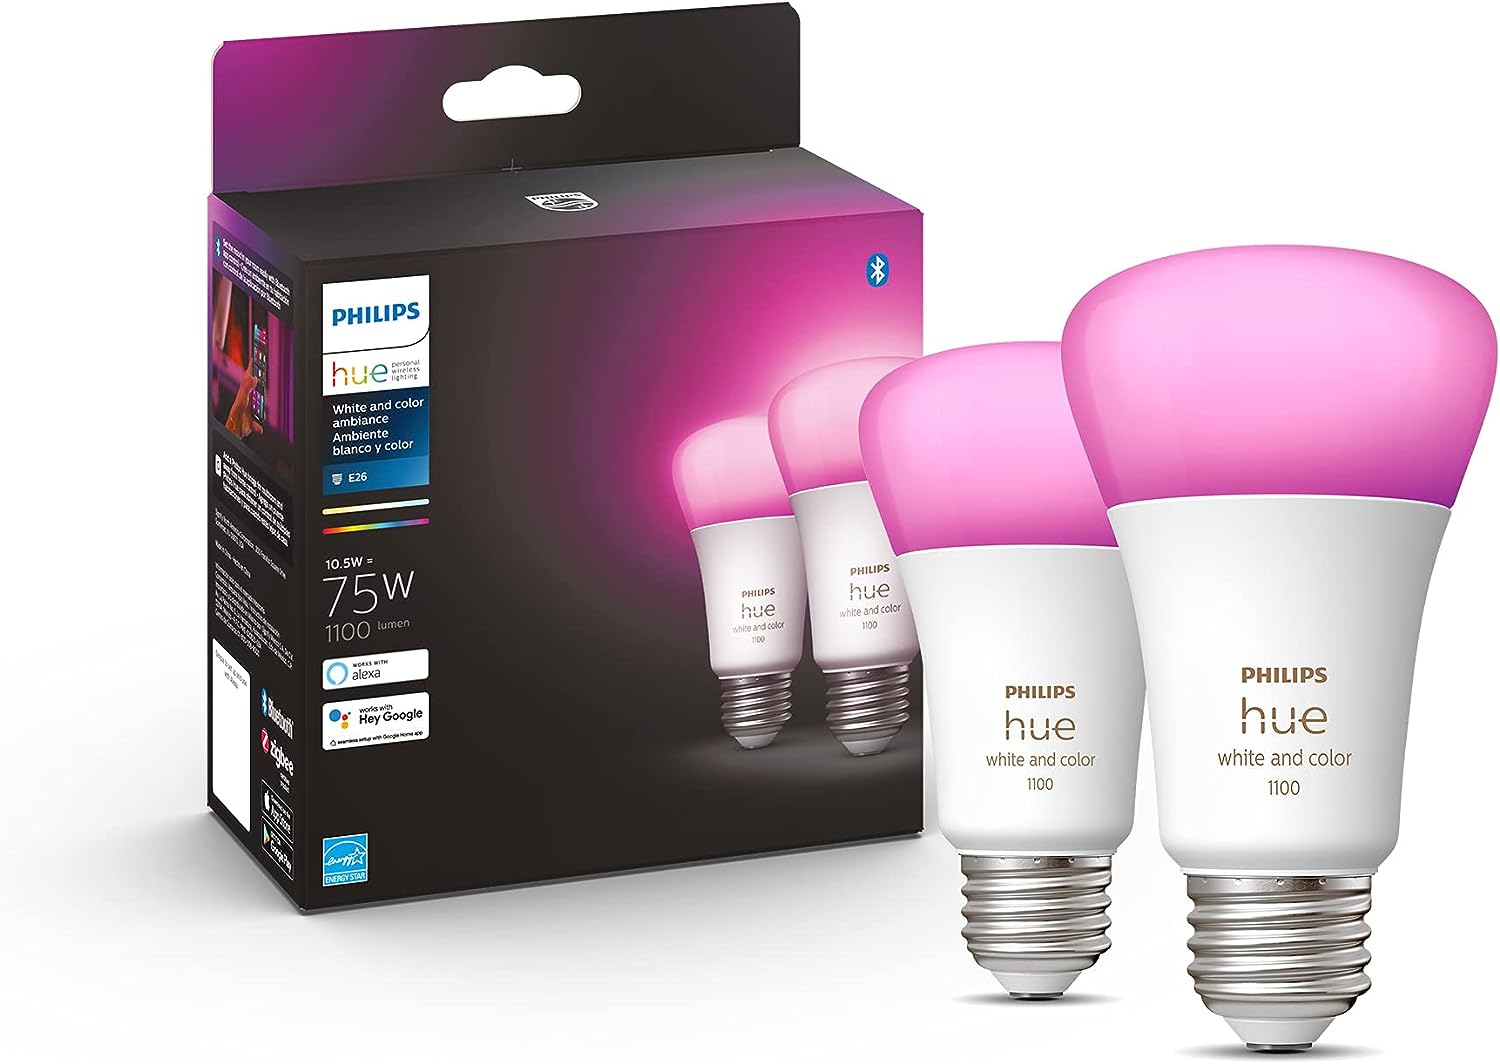 smart bulbs from Philips for smart homes